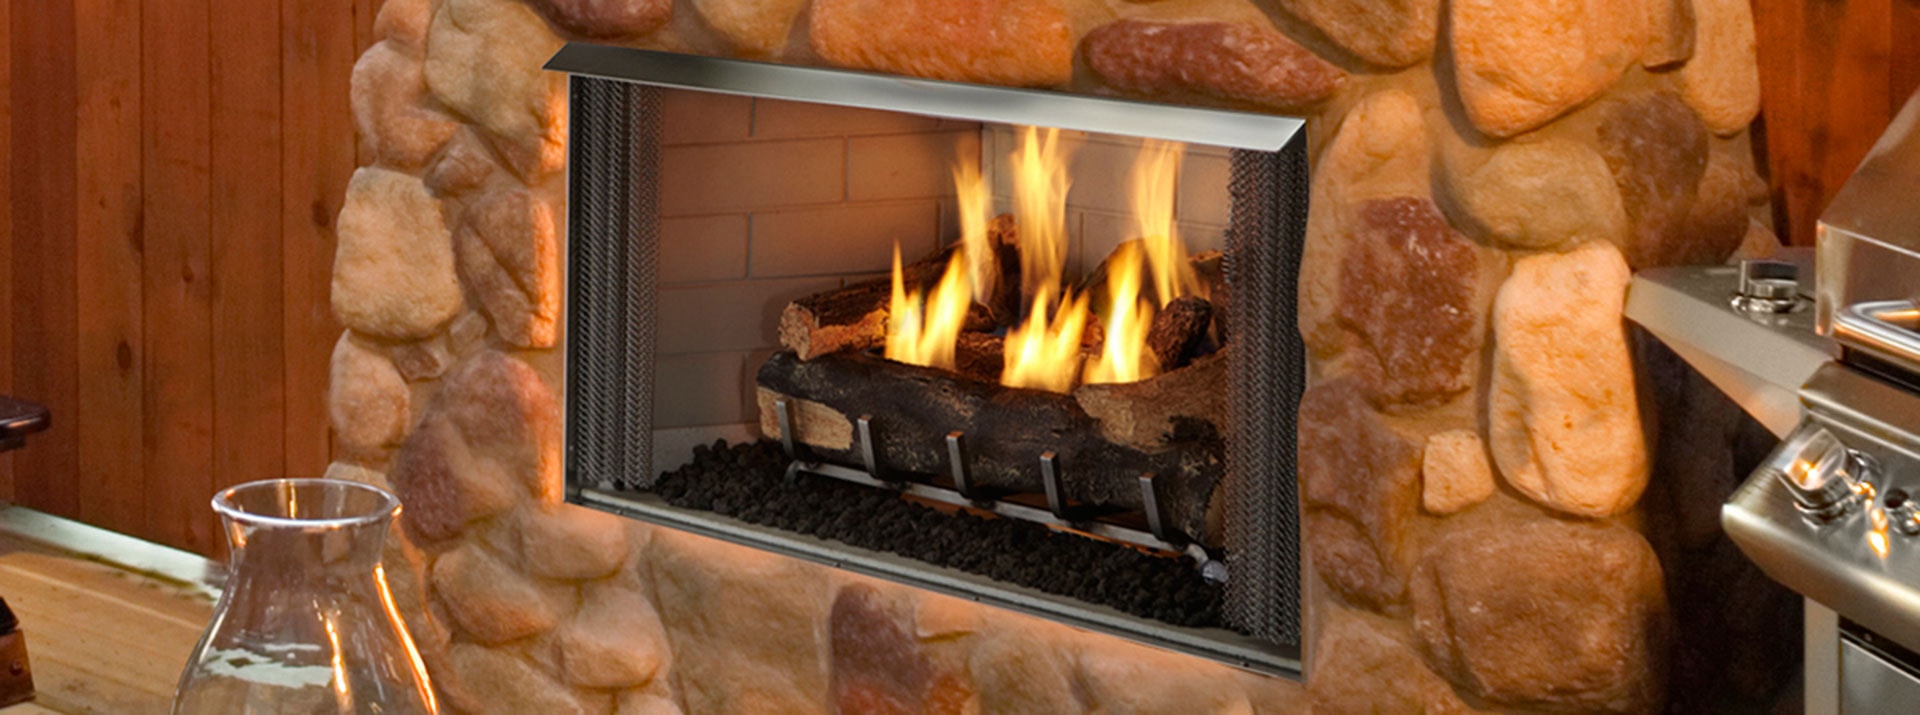 Fireplace Glass Doors for Sale Beautiful Outdoor Lifestyles Villa Gas Pact Outdoor Fireplace